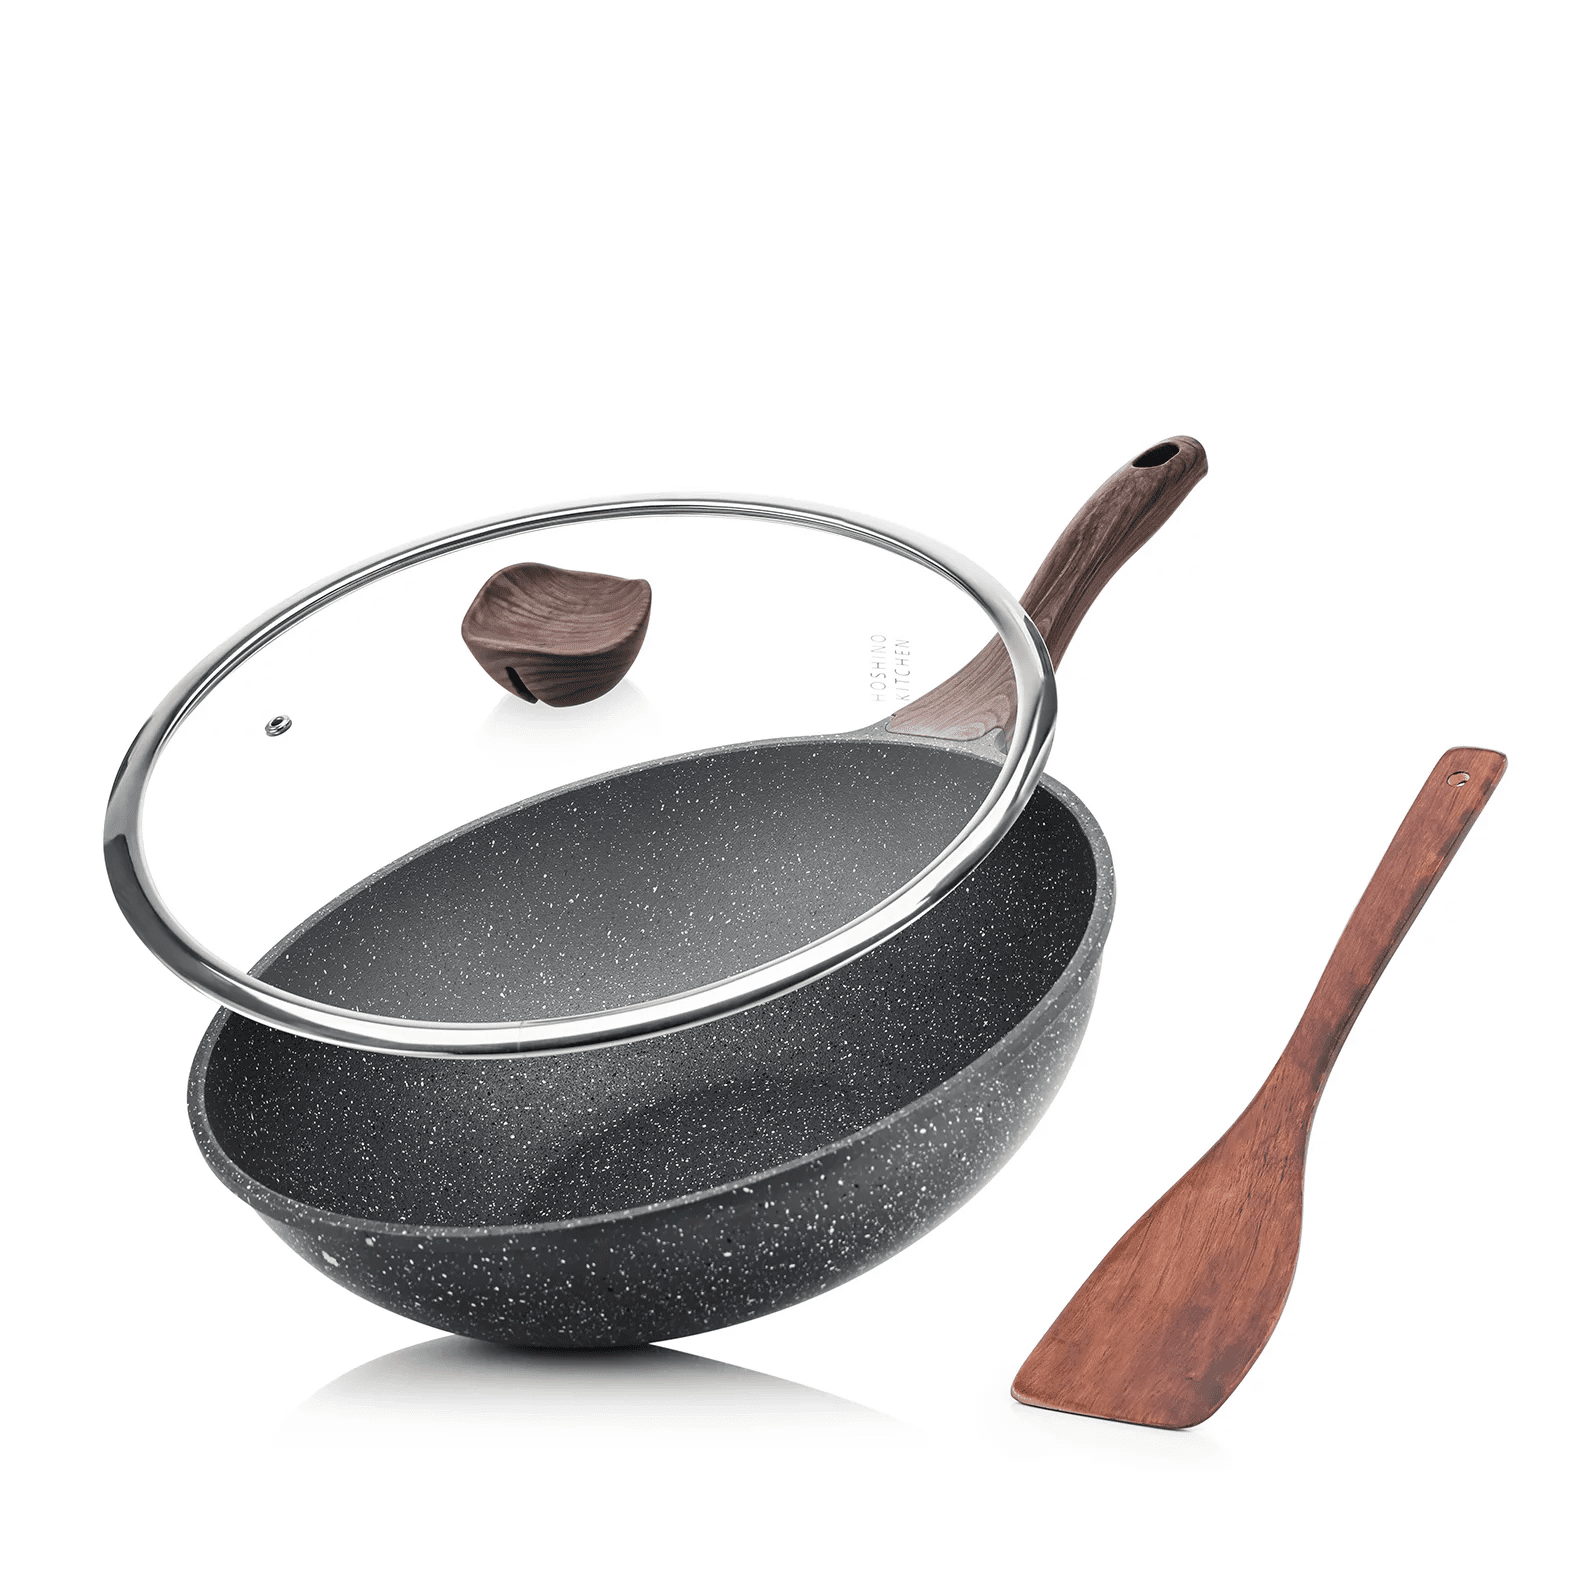  ANEDER Wok Pan Nonstick 12.5 Inch Skillet, Frying Pan with Lid  & Spatula Wok Pans for Cooking Electric, Induction & Gas Stoves, Oven Safe:  Home & Kitchen